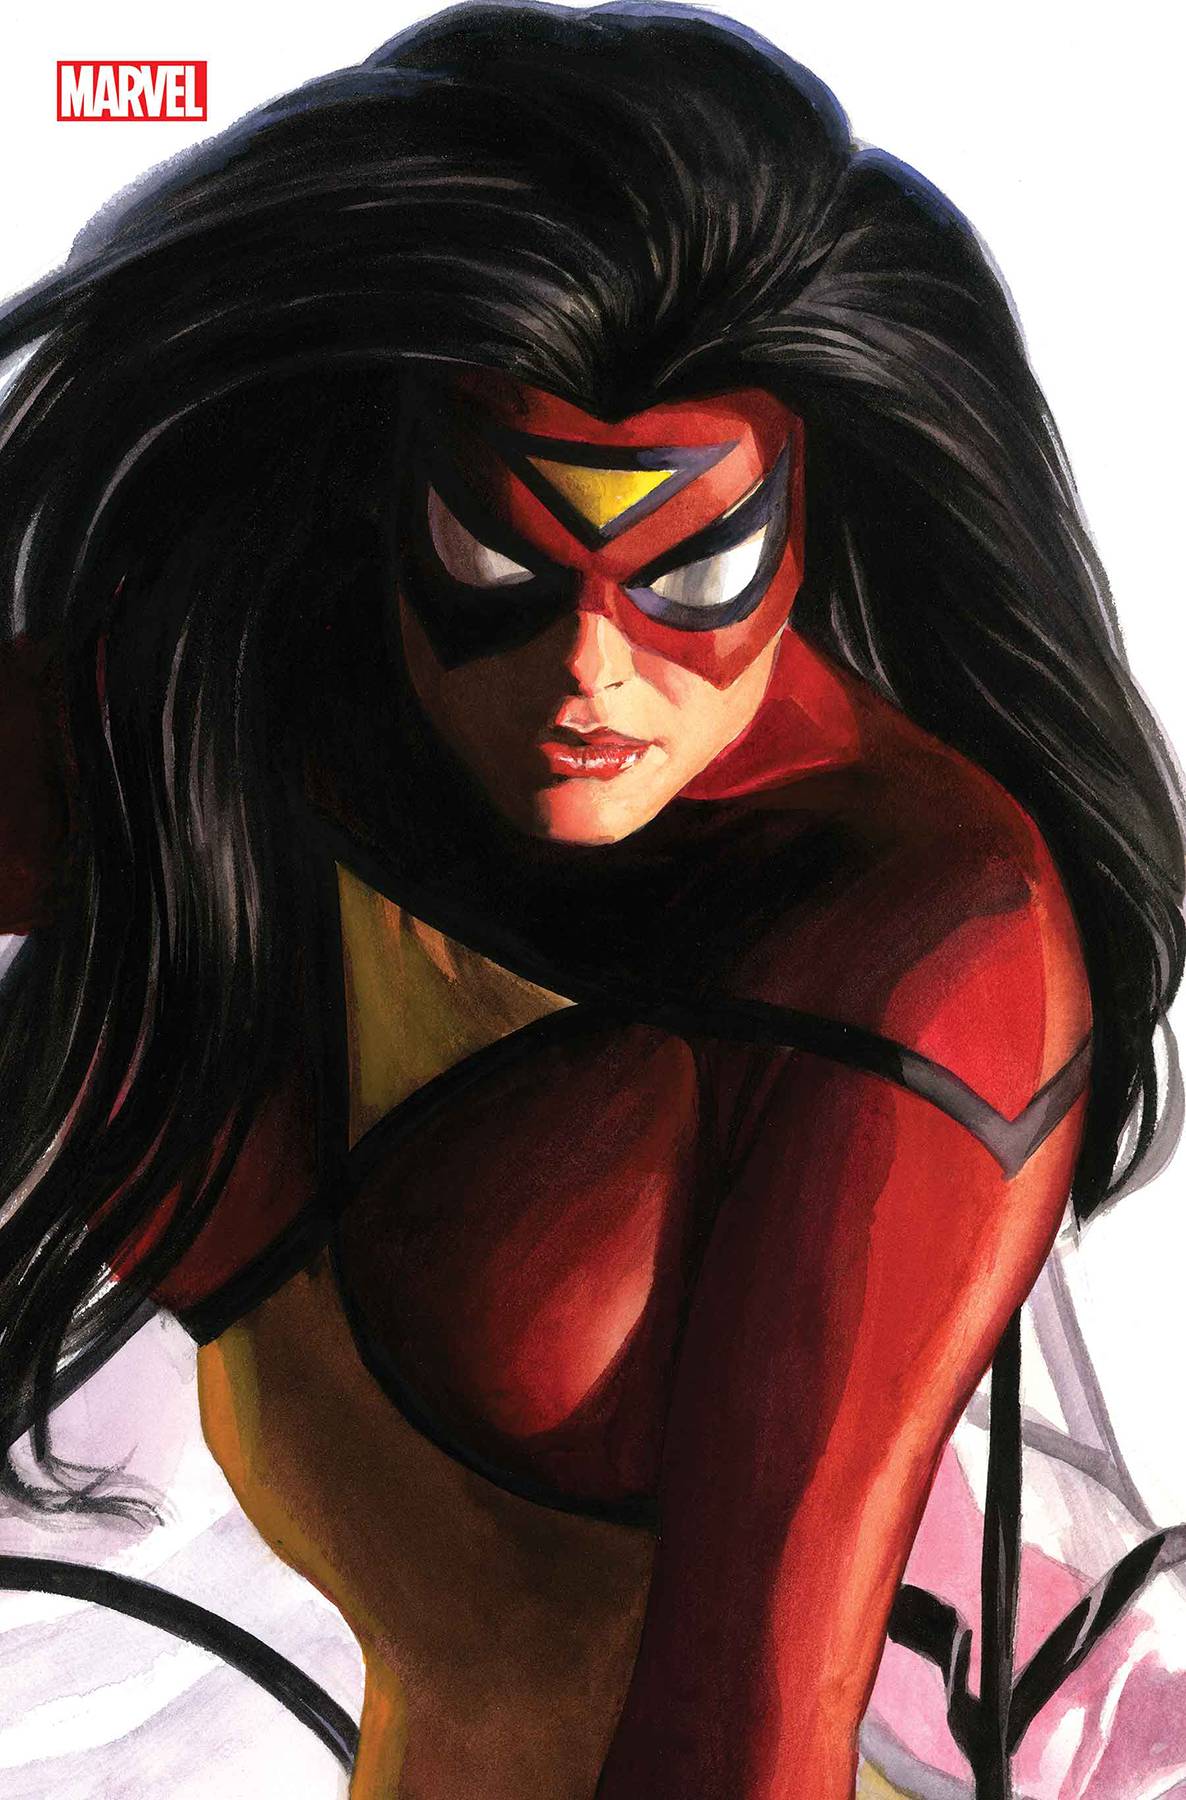 SPIDER-WOMAN #5 ALEX ROSS SPIDER-WOMAN TIMELESS VARIANT 10/21/20